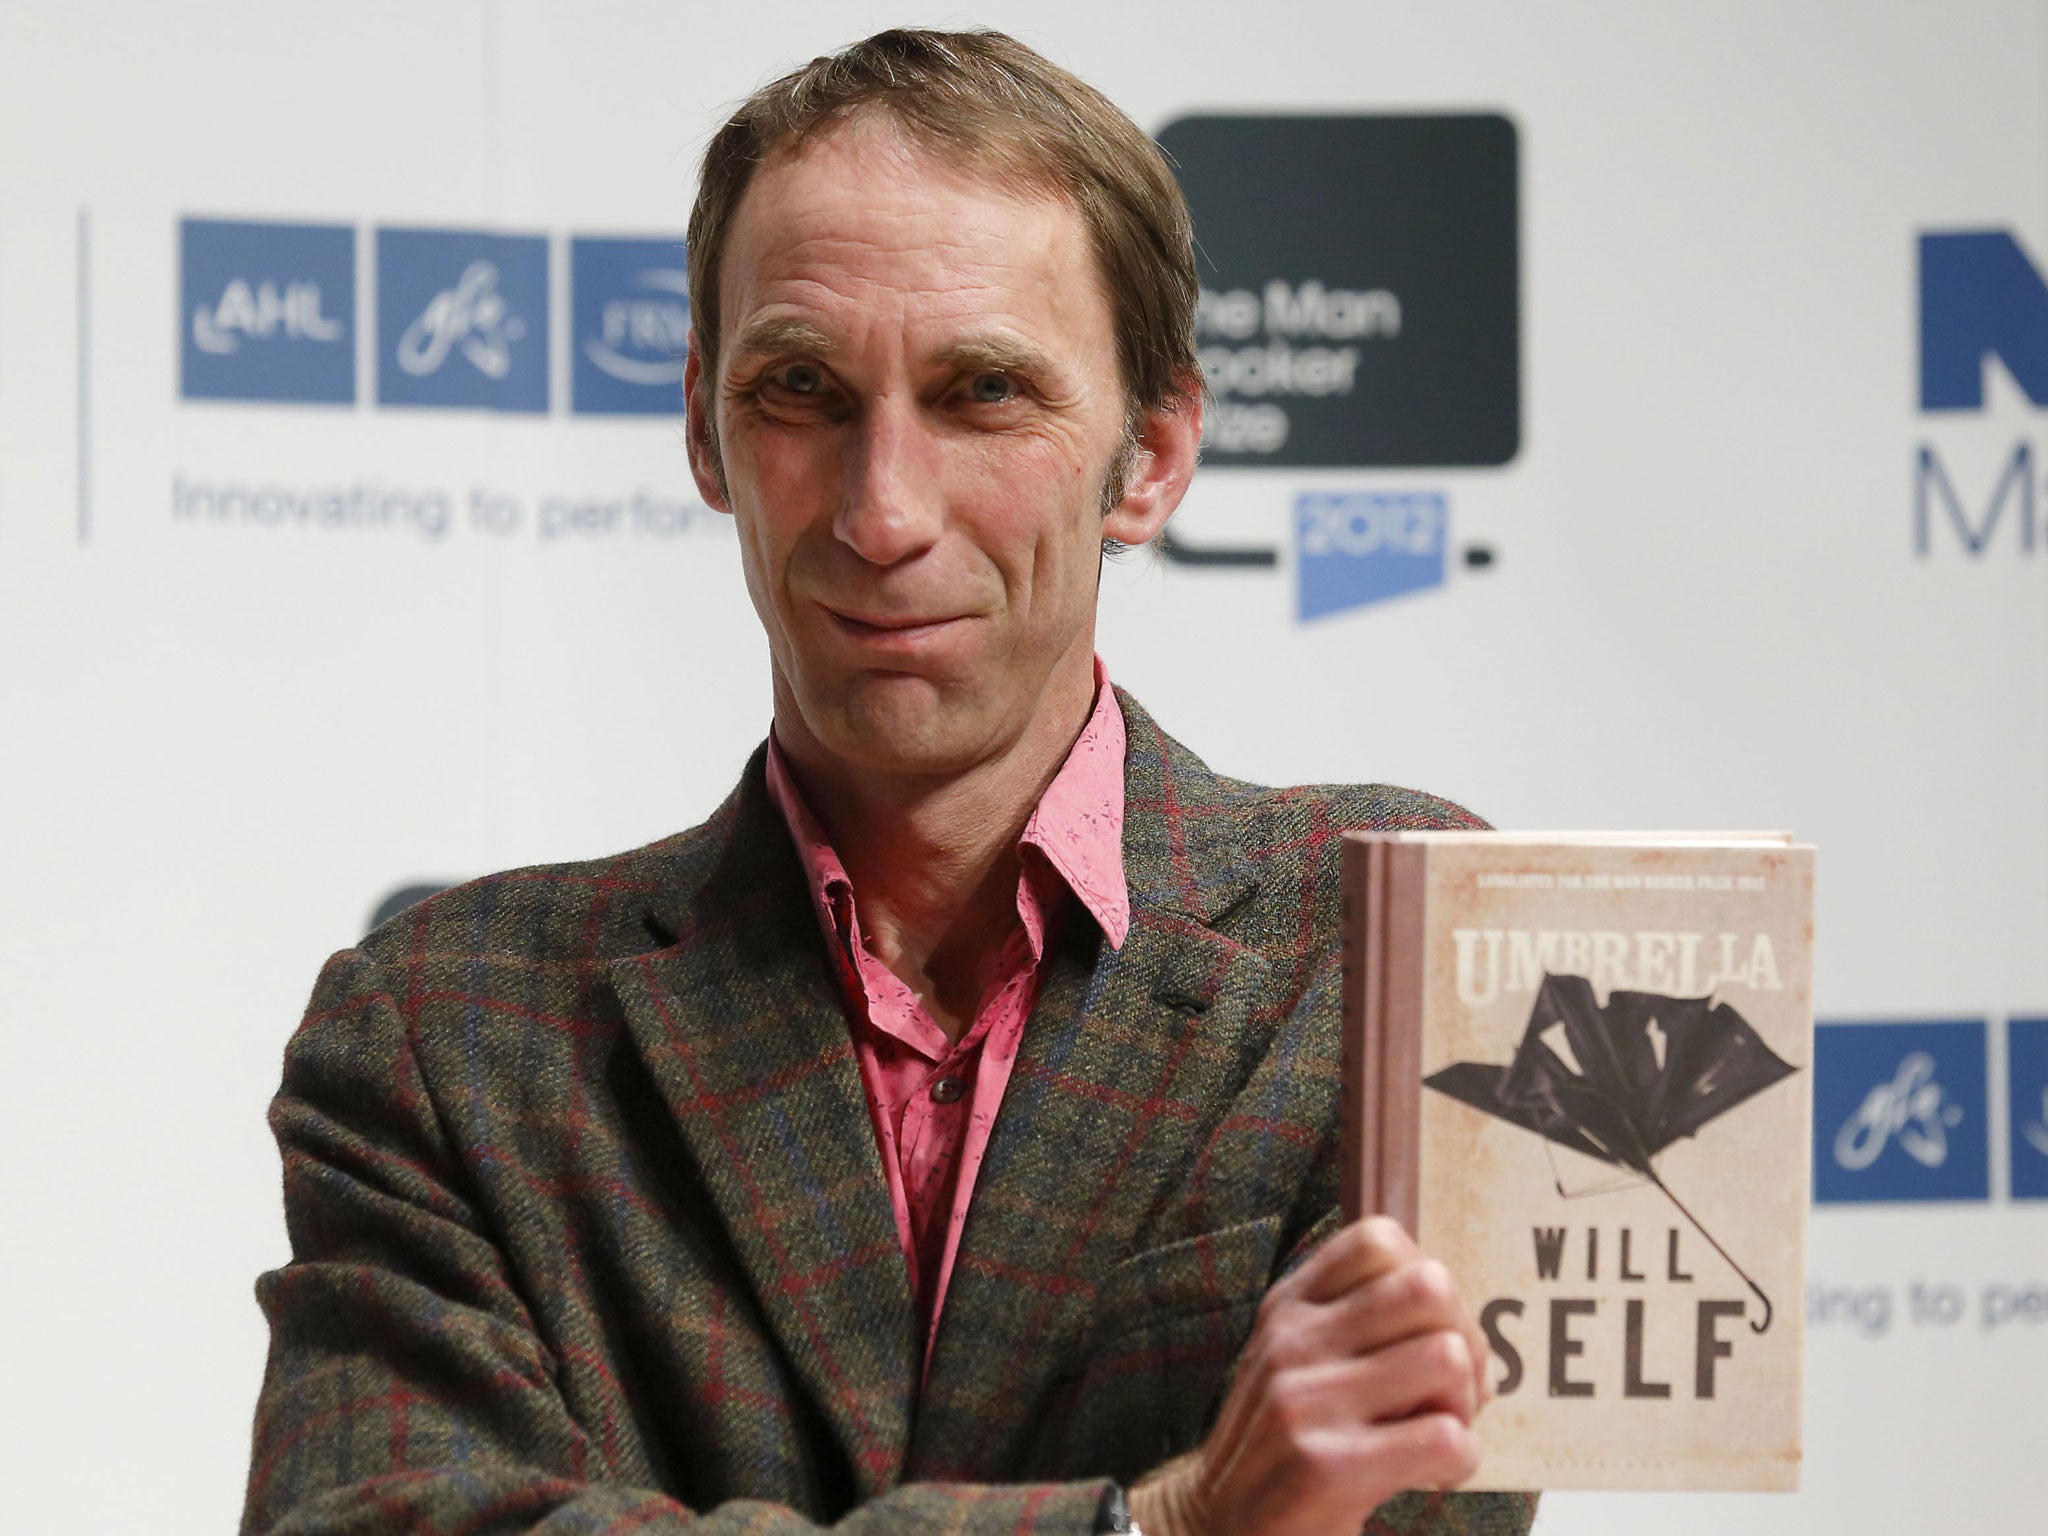 Will Self holding his book 'Umbrella' for which he is shortlisted for the Man Booker 2012 literary prize poses during a photocall in London on October 15, 2012.